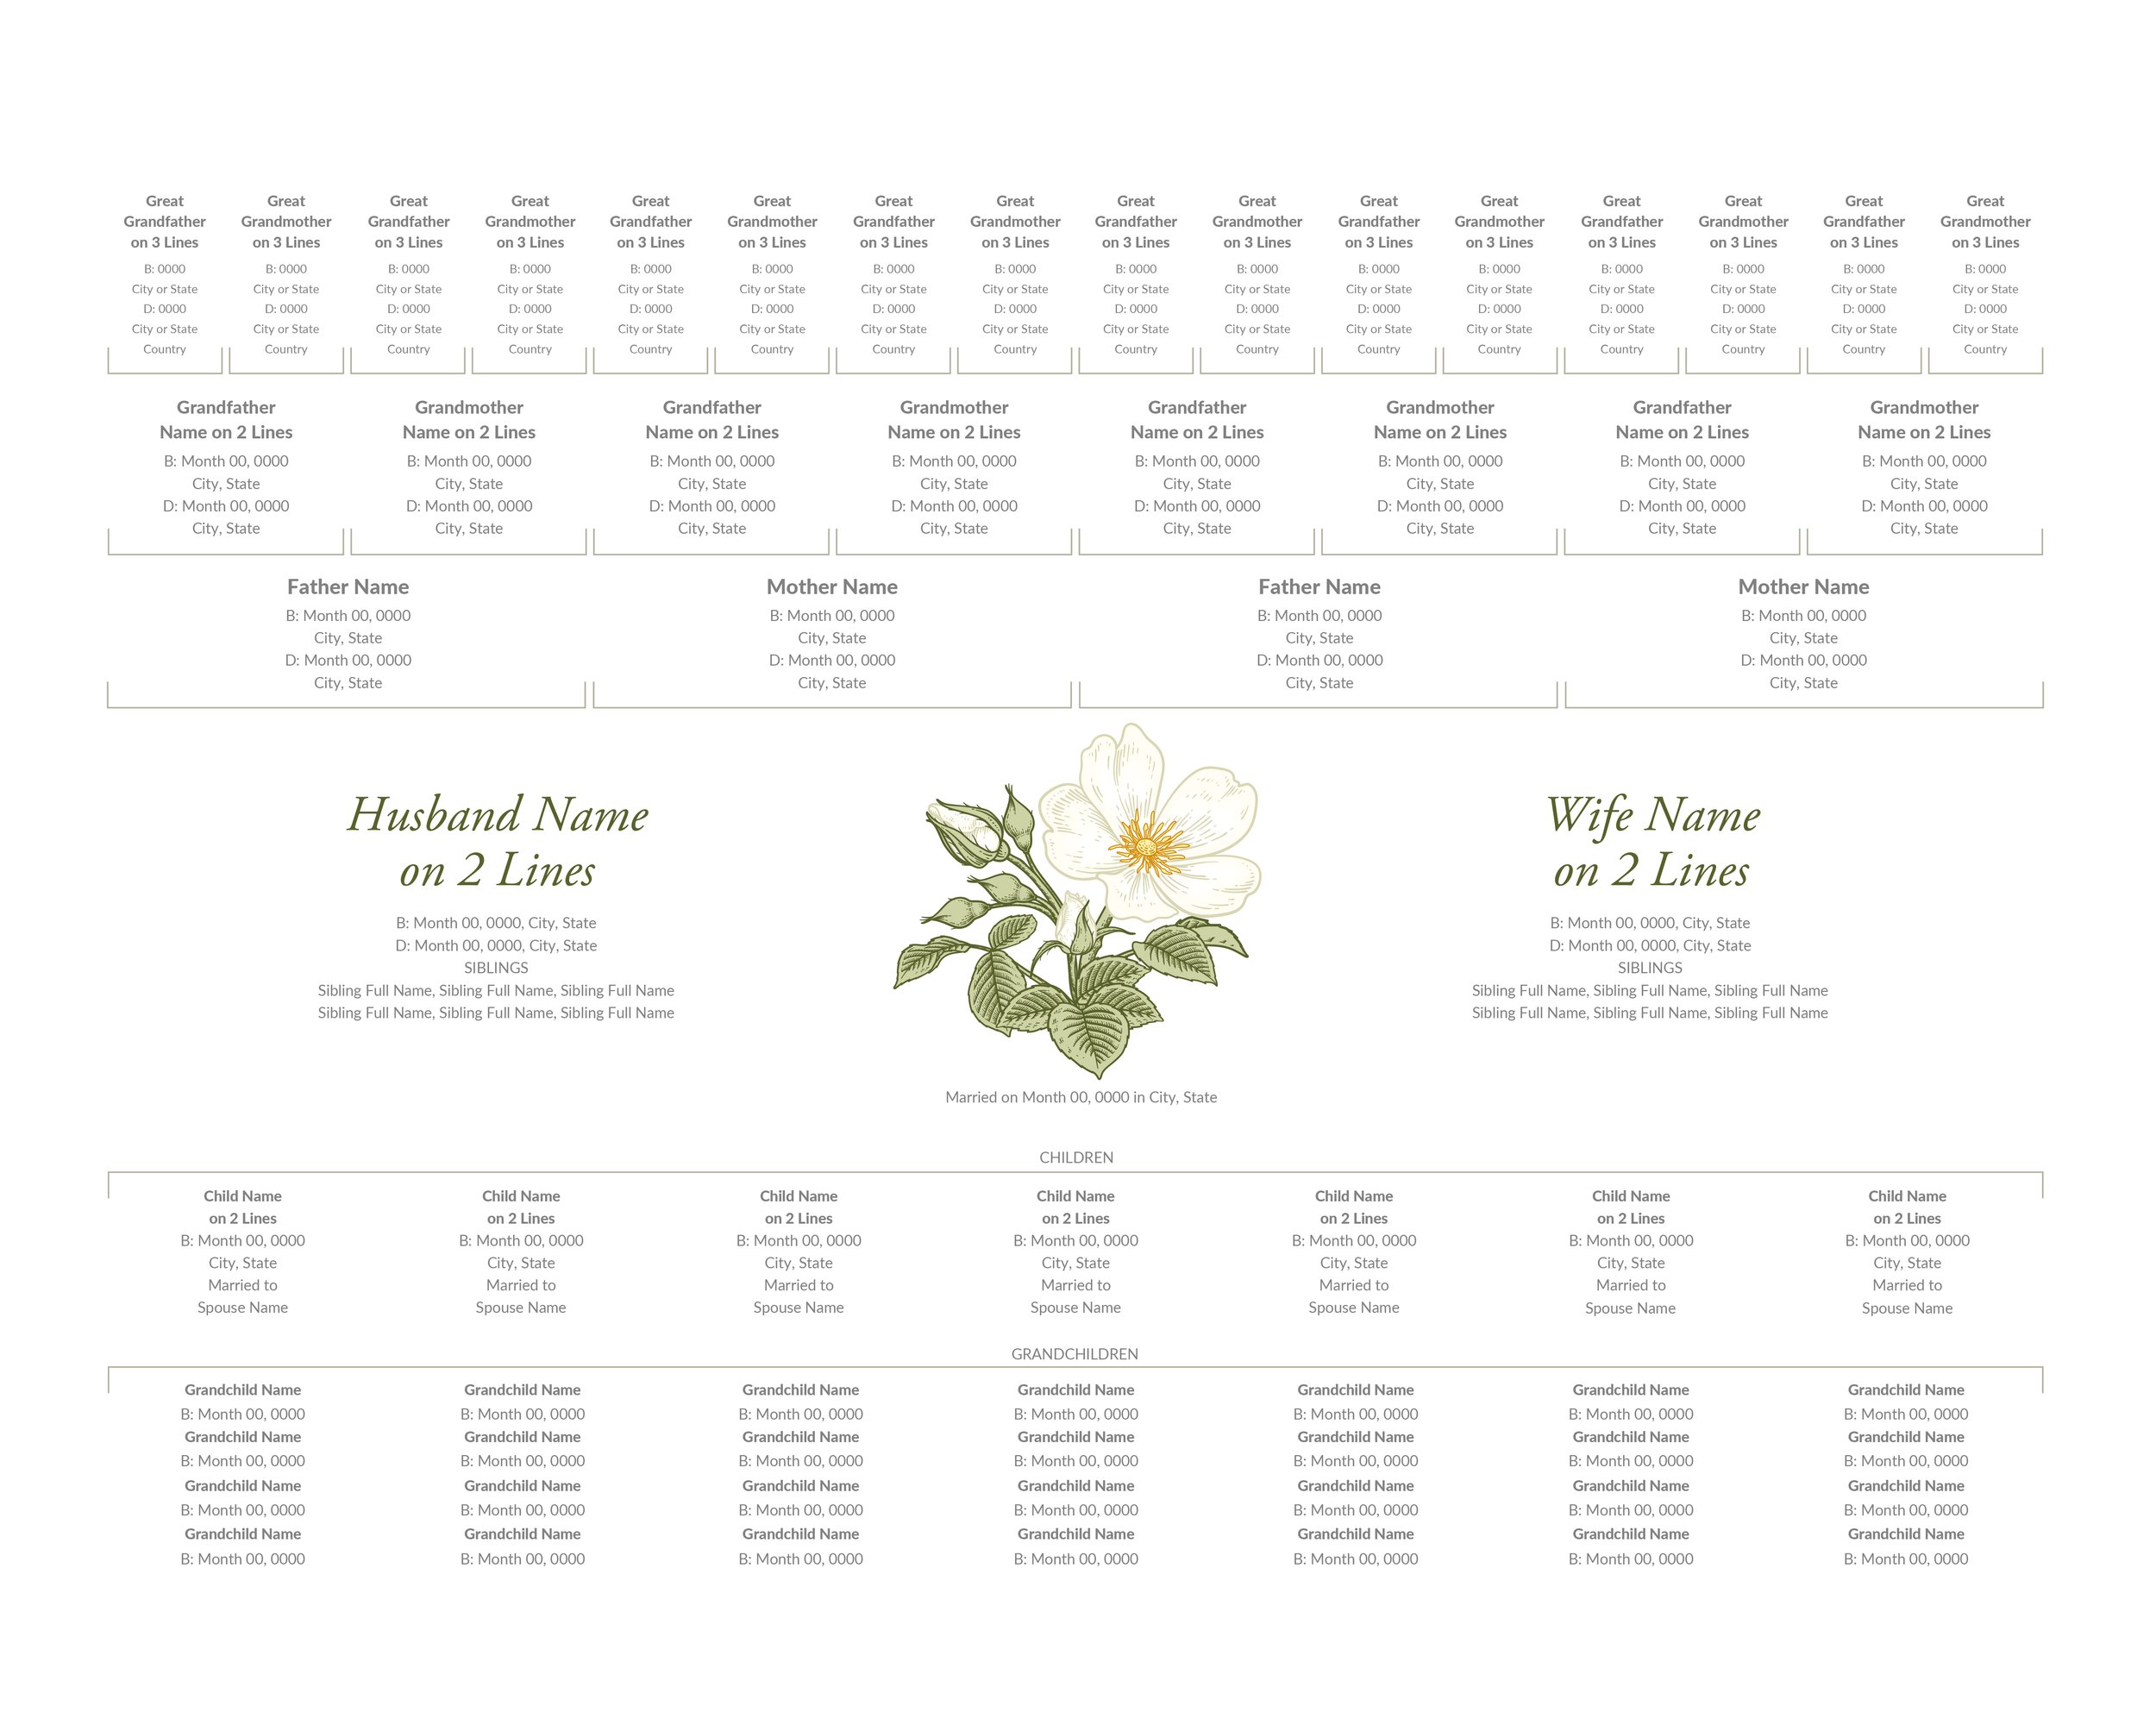 6 Generation Family Tree Template for Ancestors and Descendants - White ...